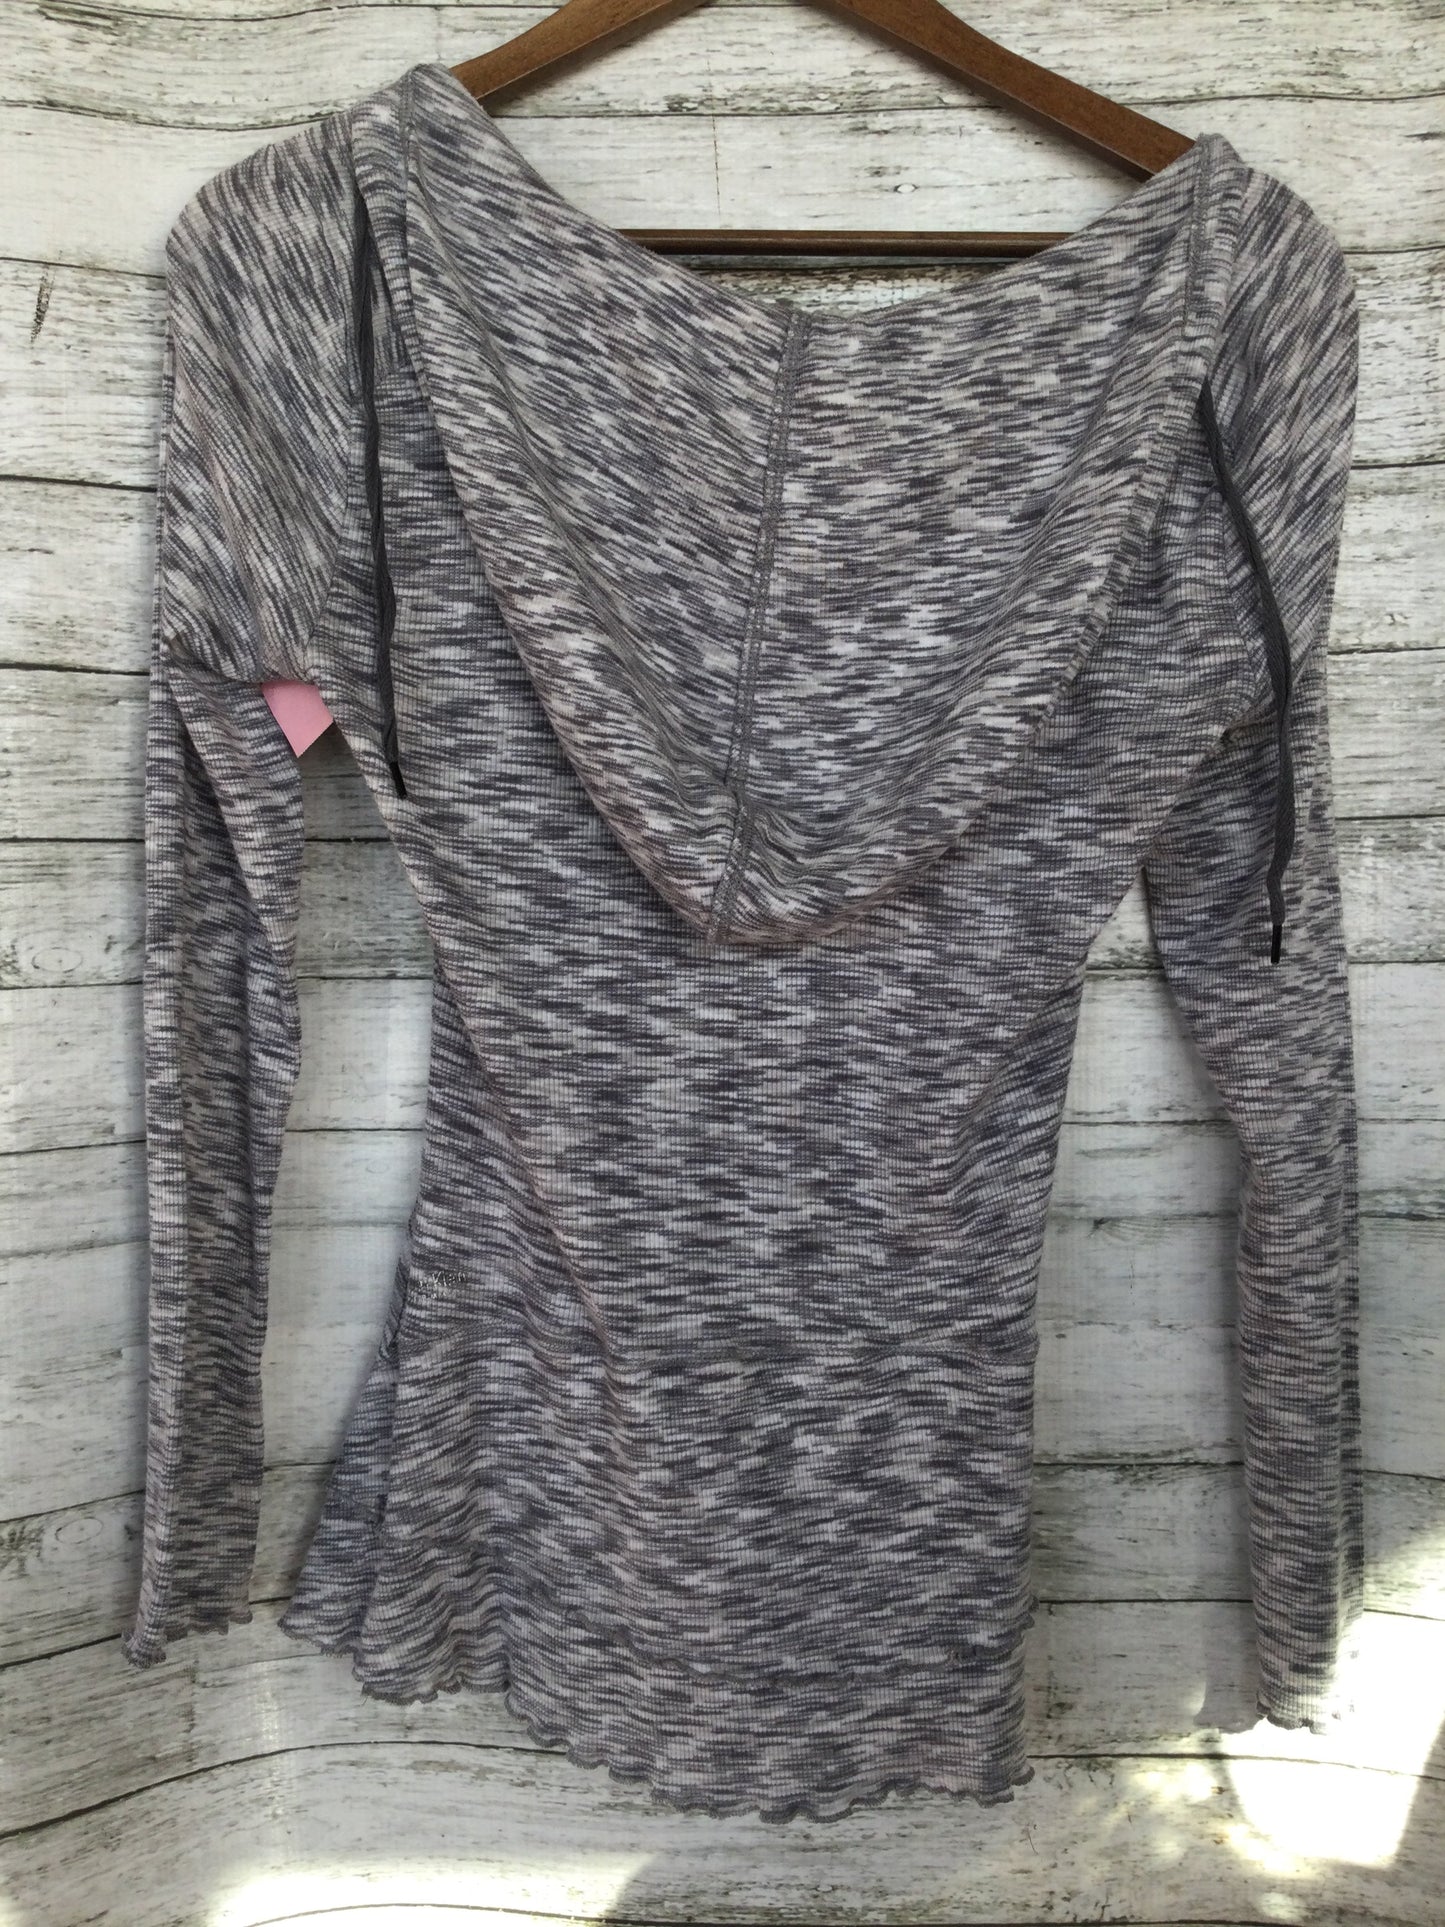 Top Long Sleeve Basic By Calvin Klein  Size: M